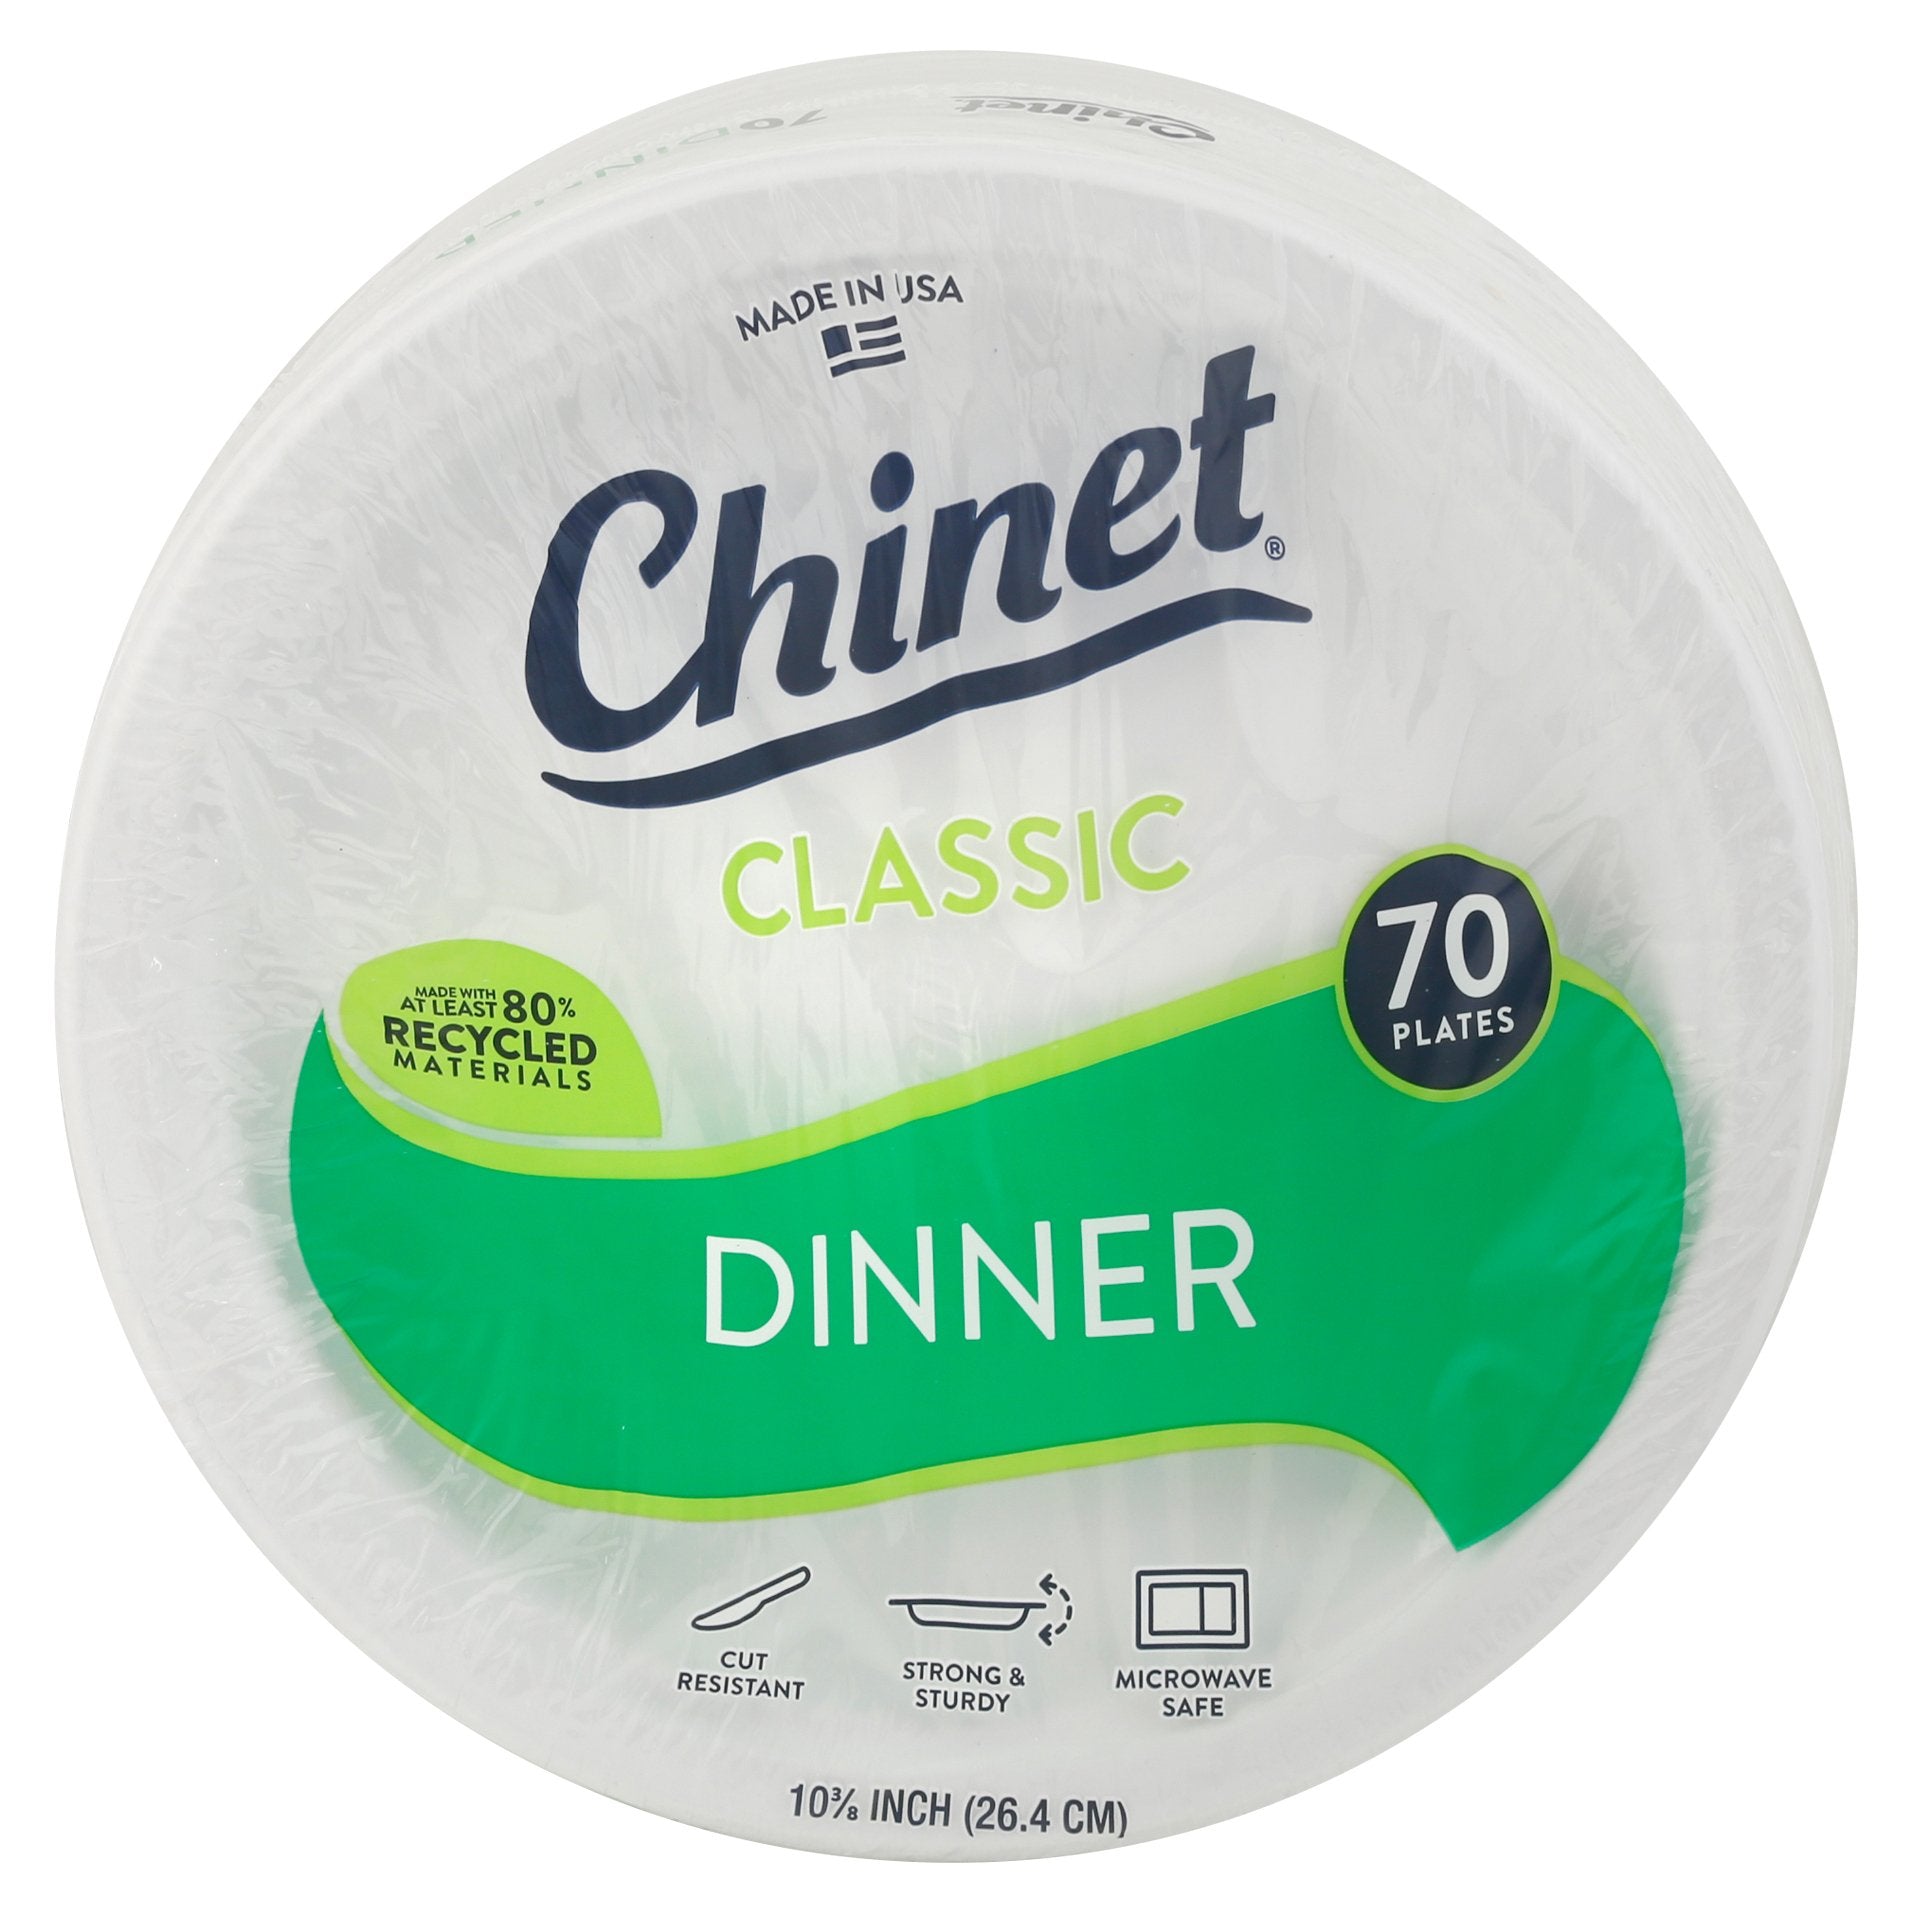 Chinet Classic Dinner Plates, 100-Count